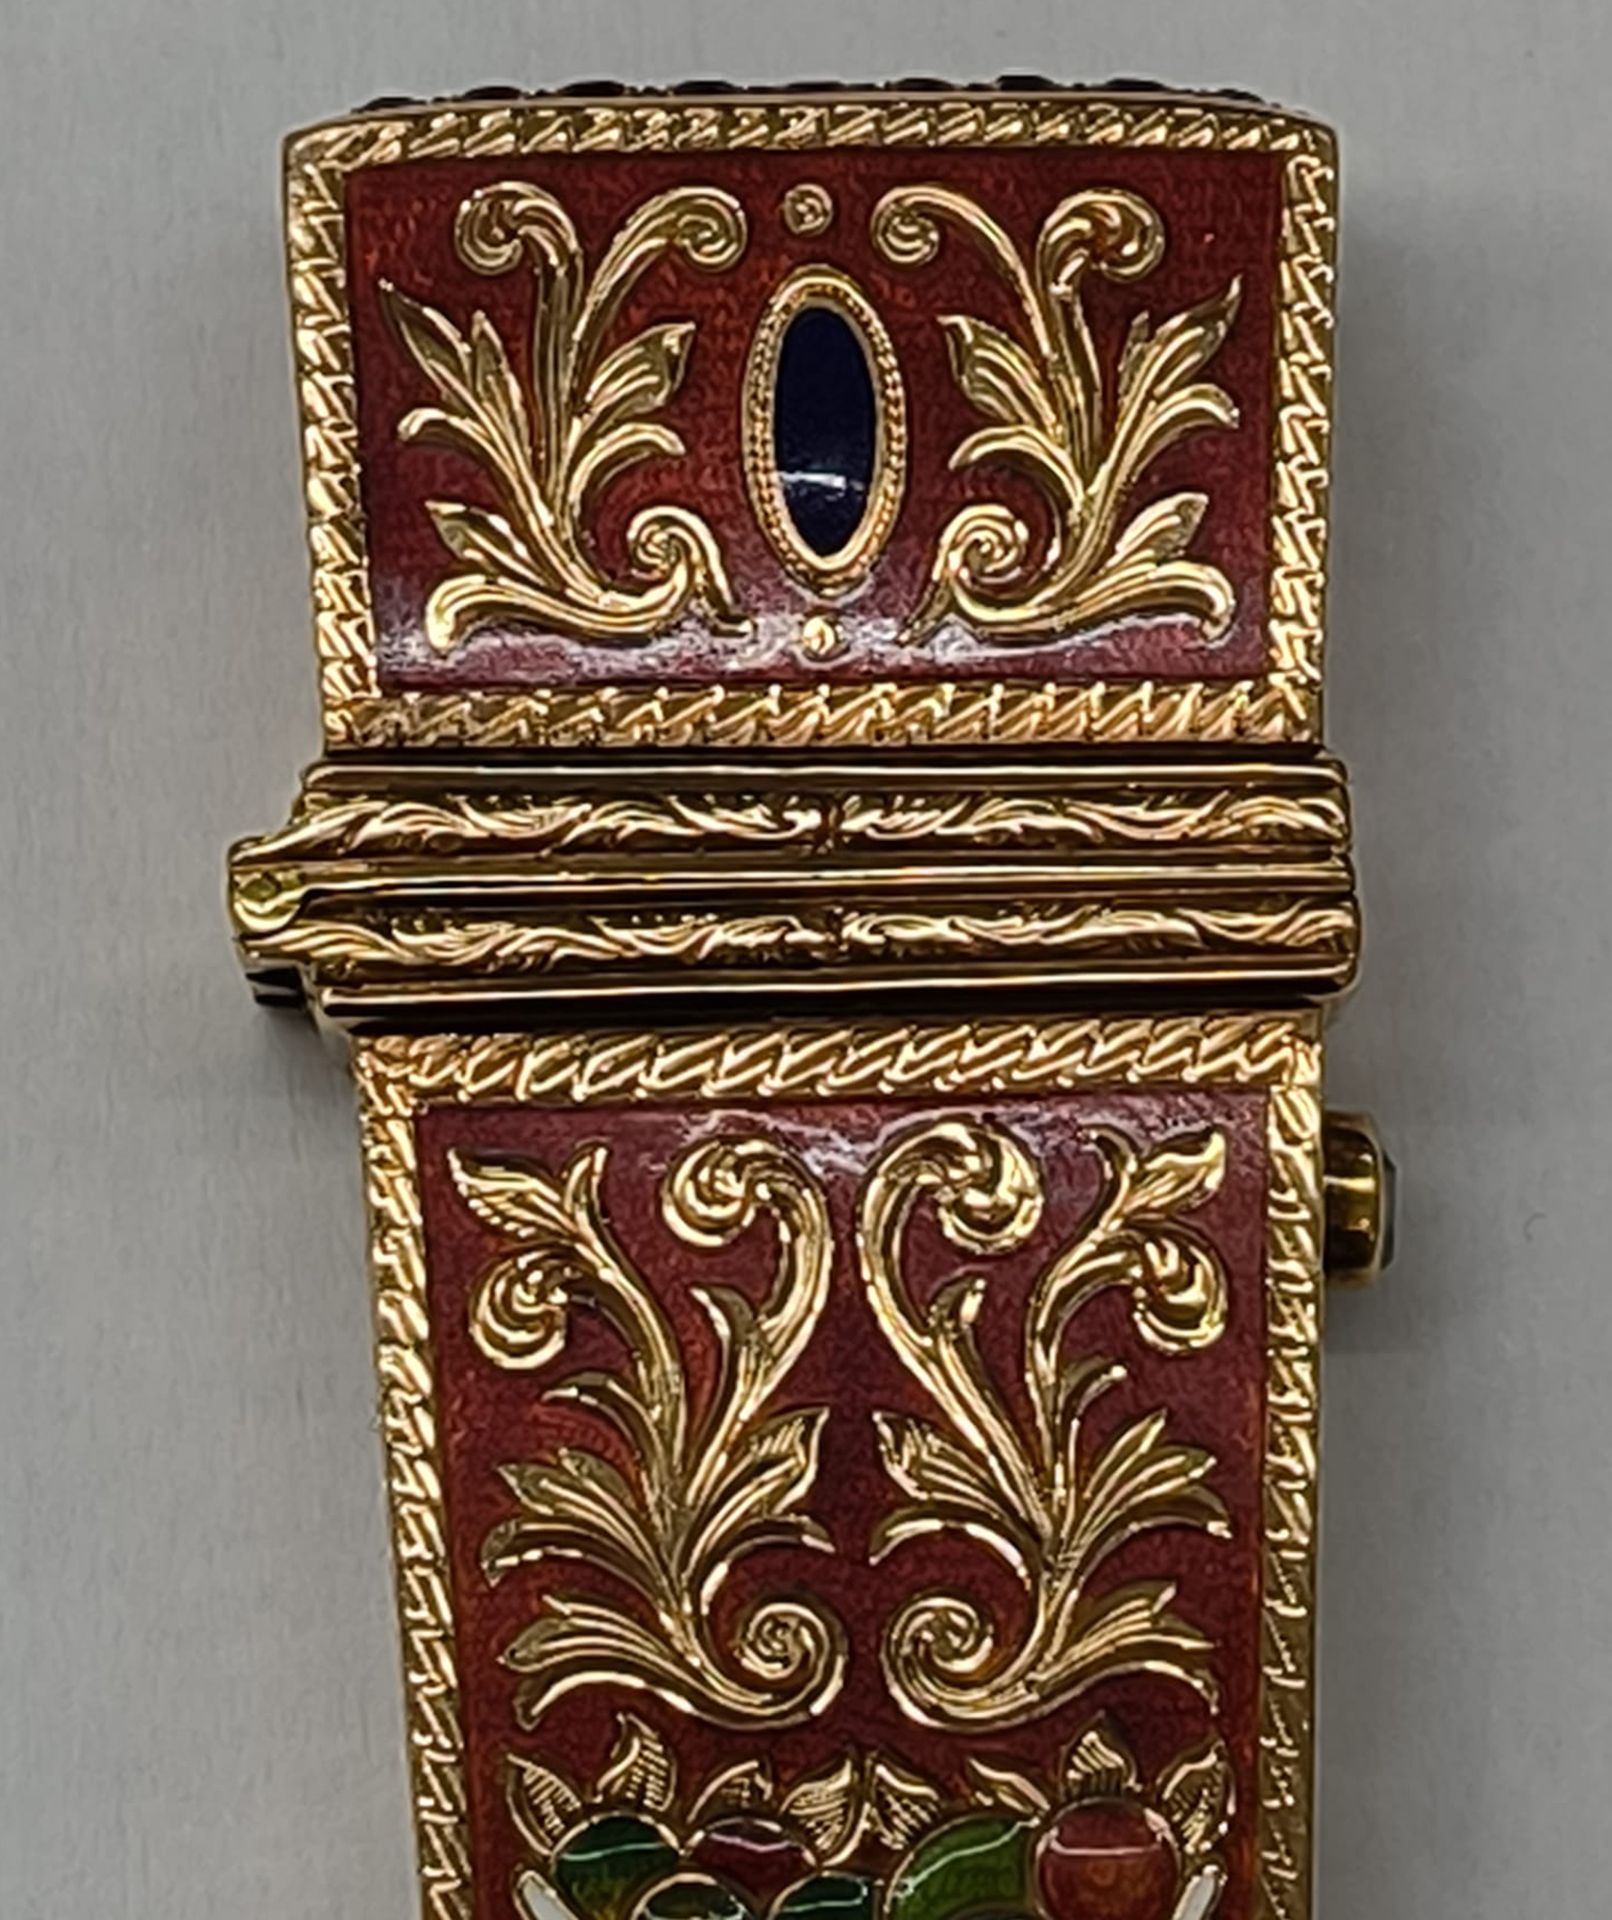 Etui in sterling gold and enamel set with rubies and old-cut diamond, Russian work from the early 20 - Bild 3 aus 8